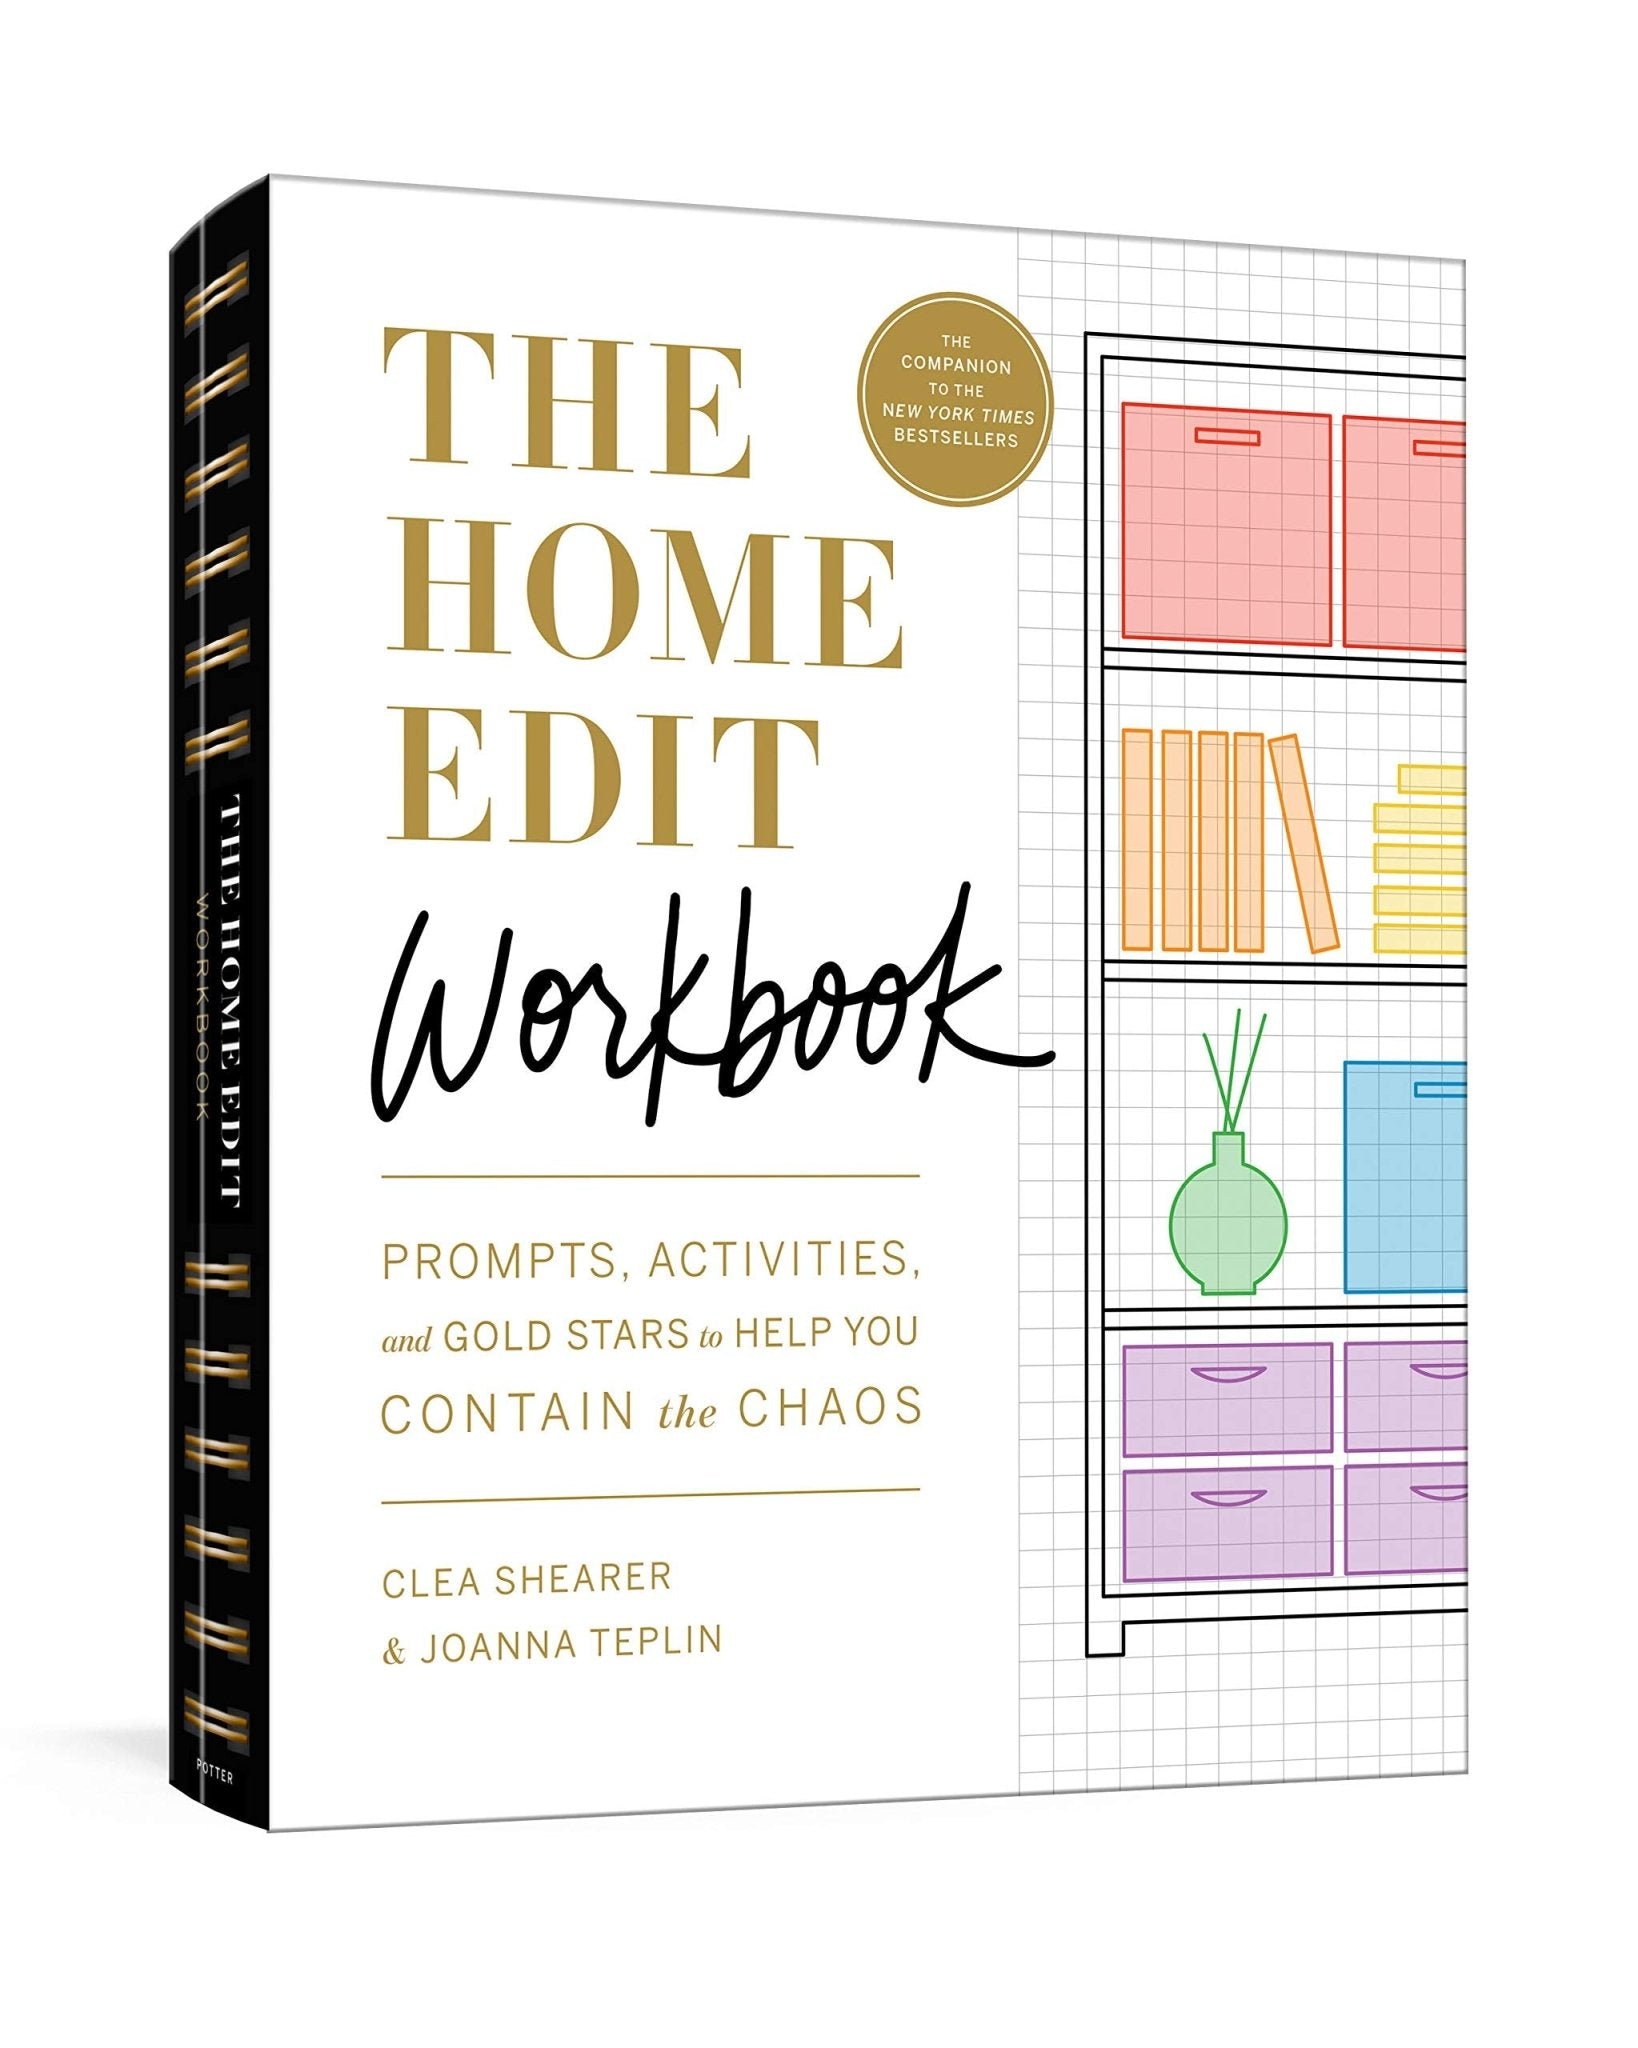 The Home Edit Workbook: Prompts, Activities, and Gold Stars to Help You Contain the Chaos by Clea Shearer & Joanna Teplin [Paperback} - LV'S Global Media